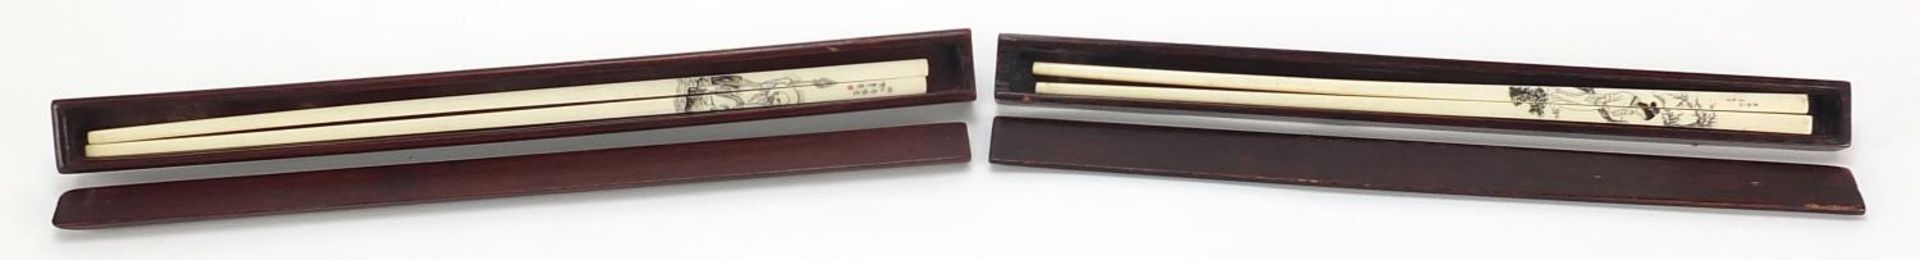 Two pairs of Chinese chop sticks with hardwood cases, the cases 30cm in length